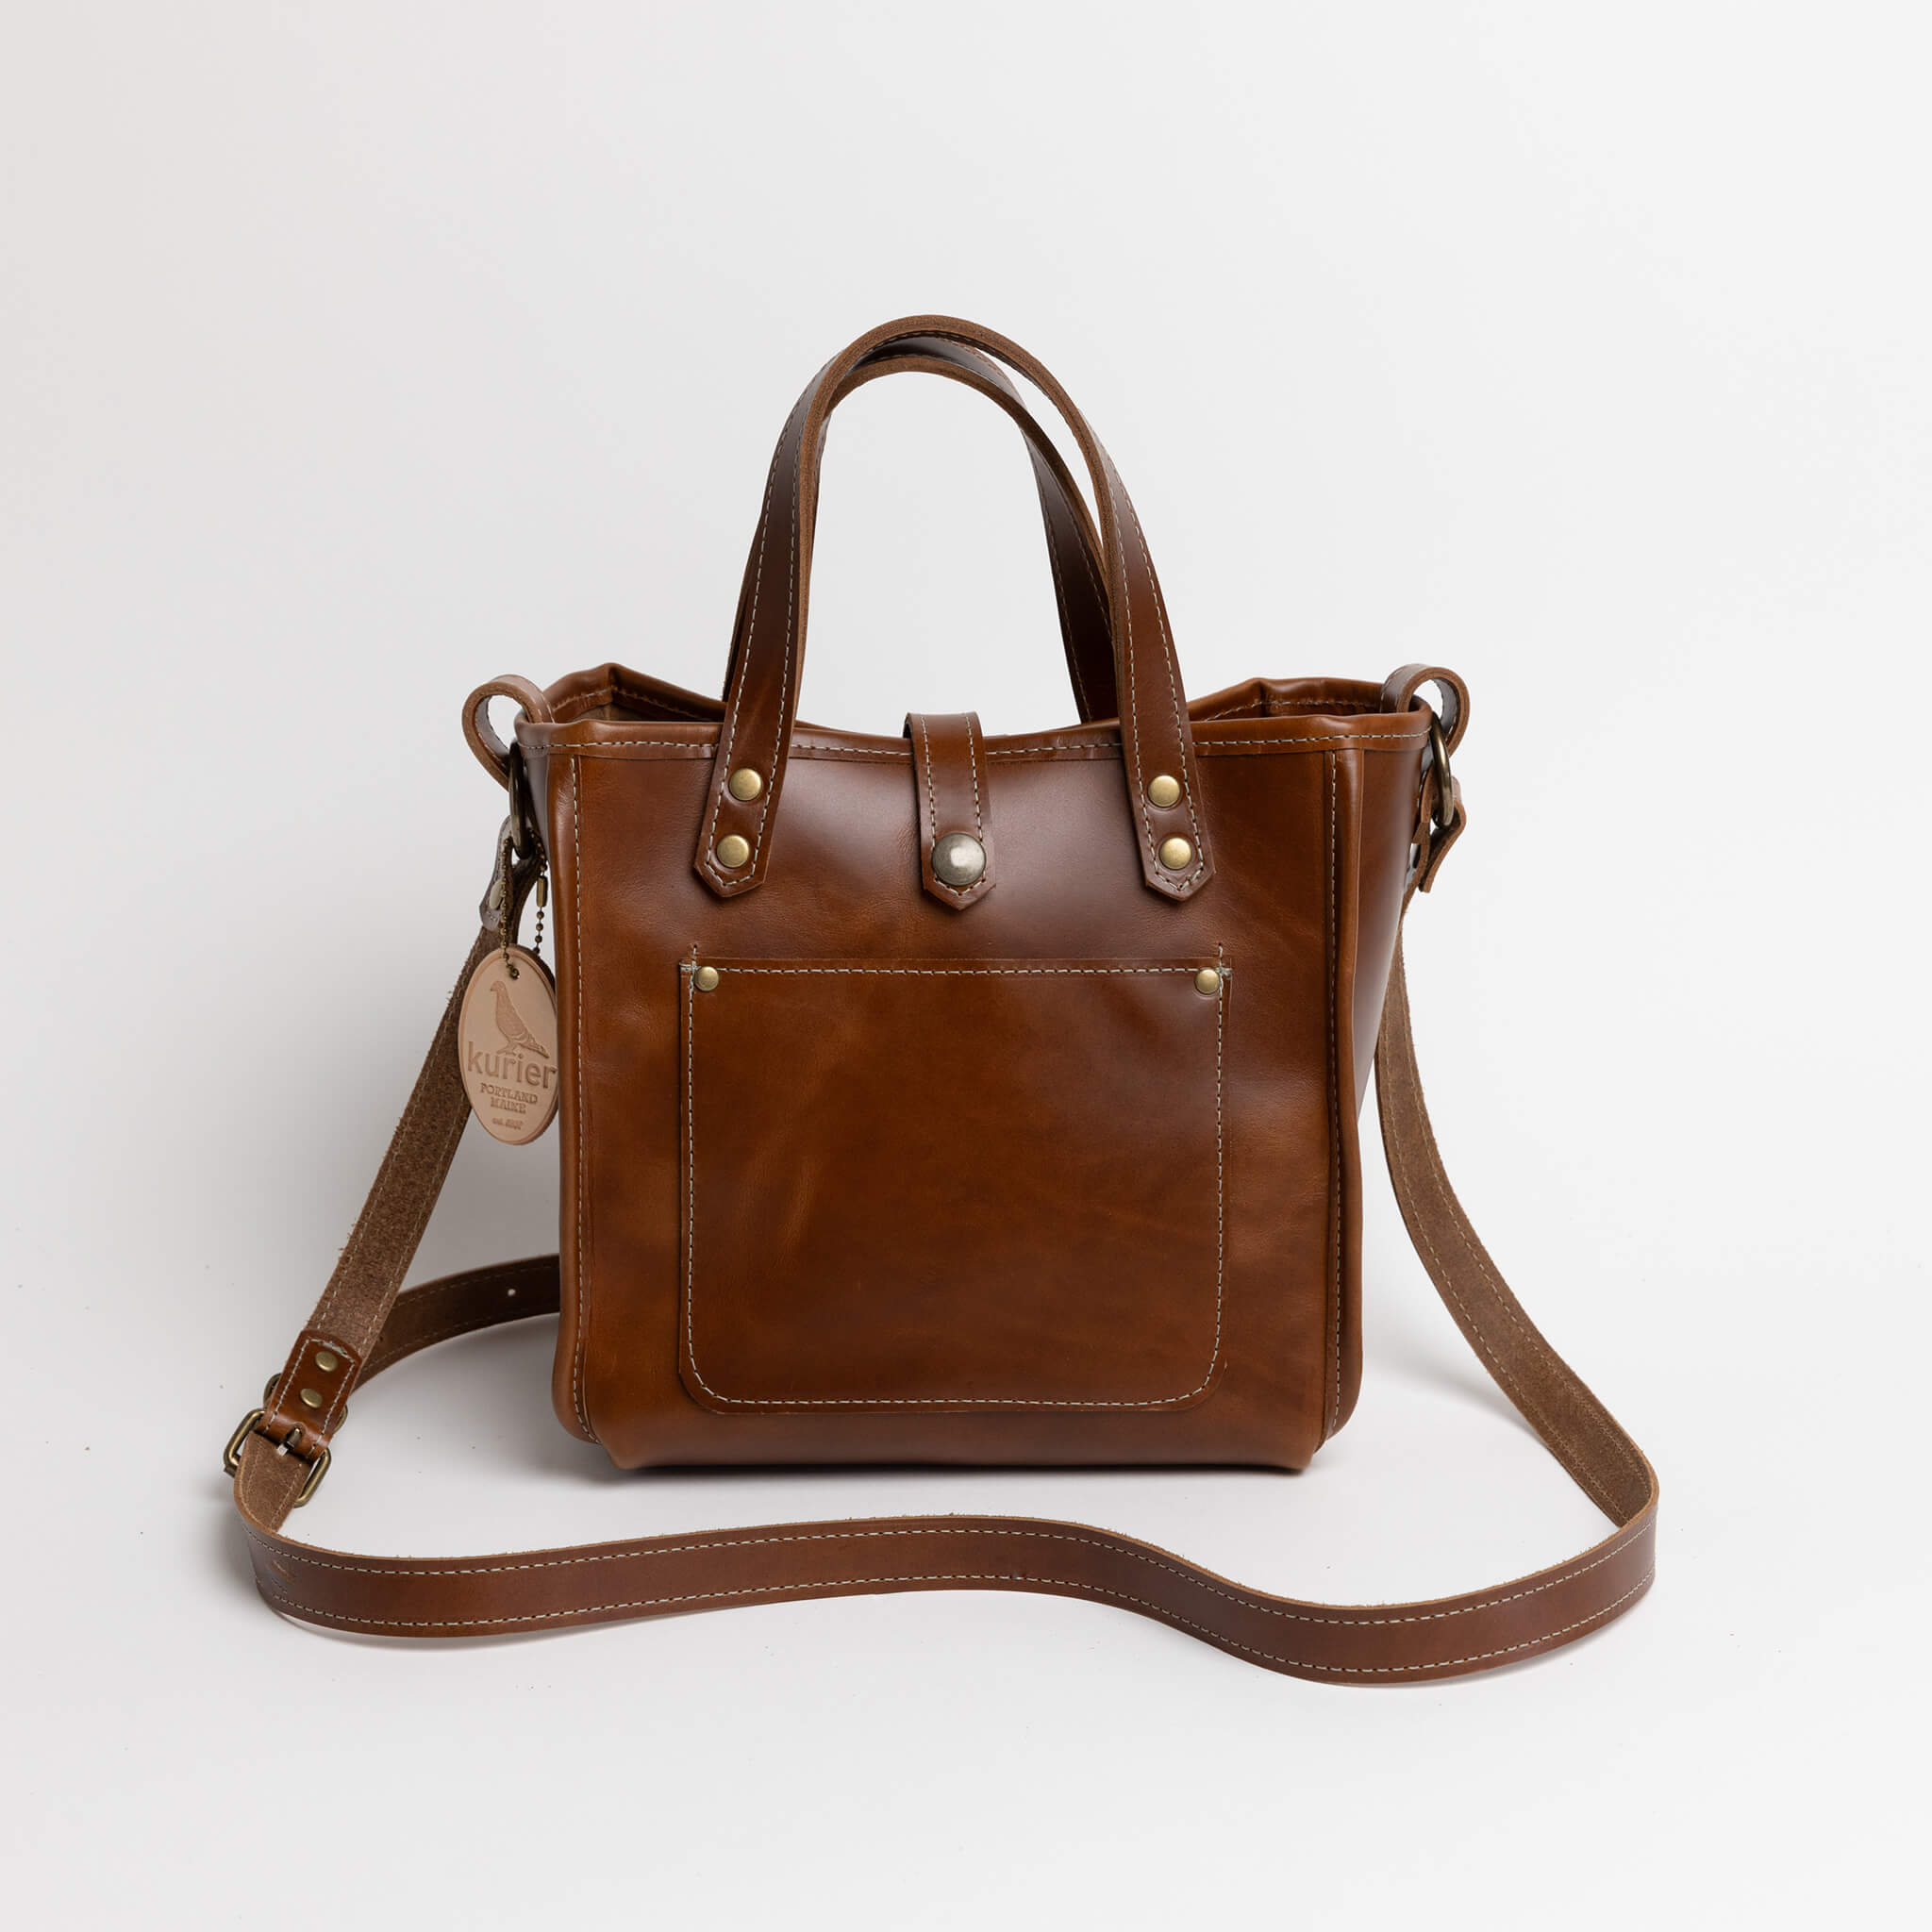 belfast tote crossbody compact - handmade leather - pecan front view